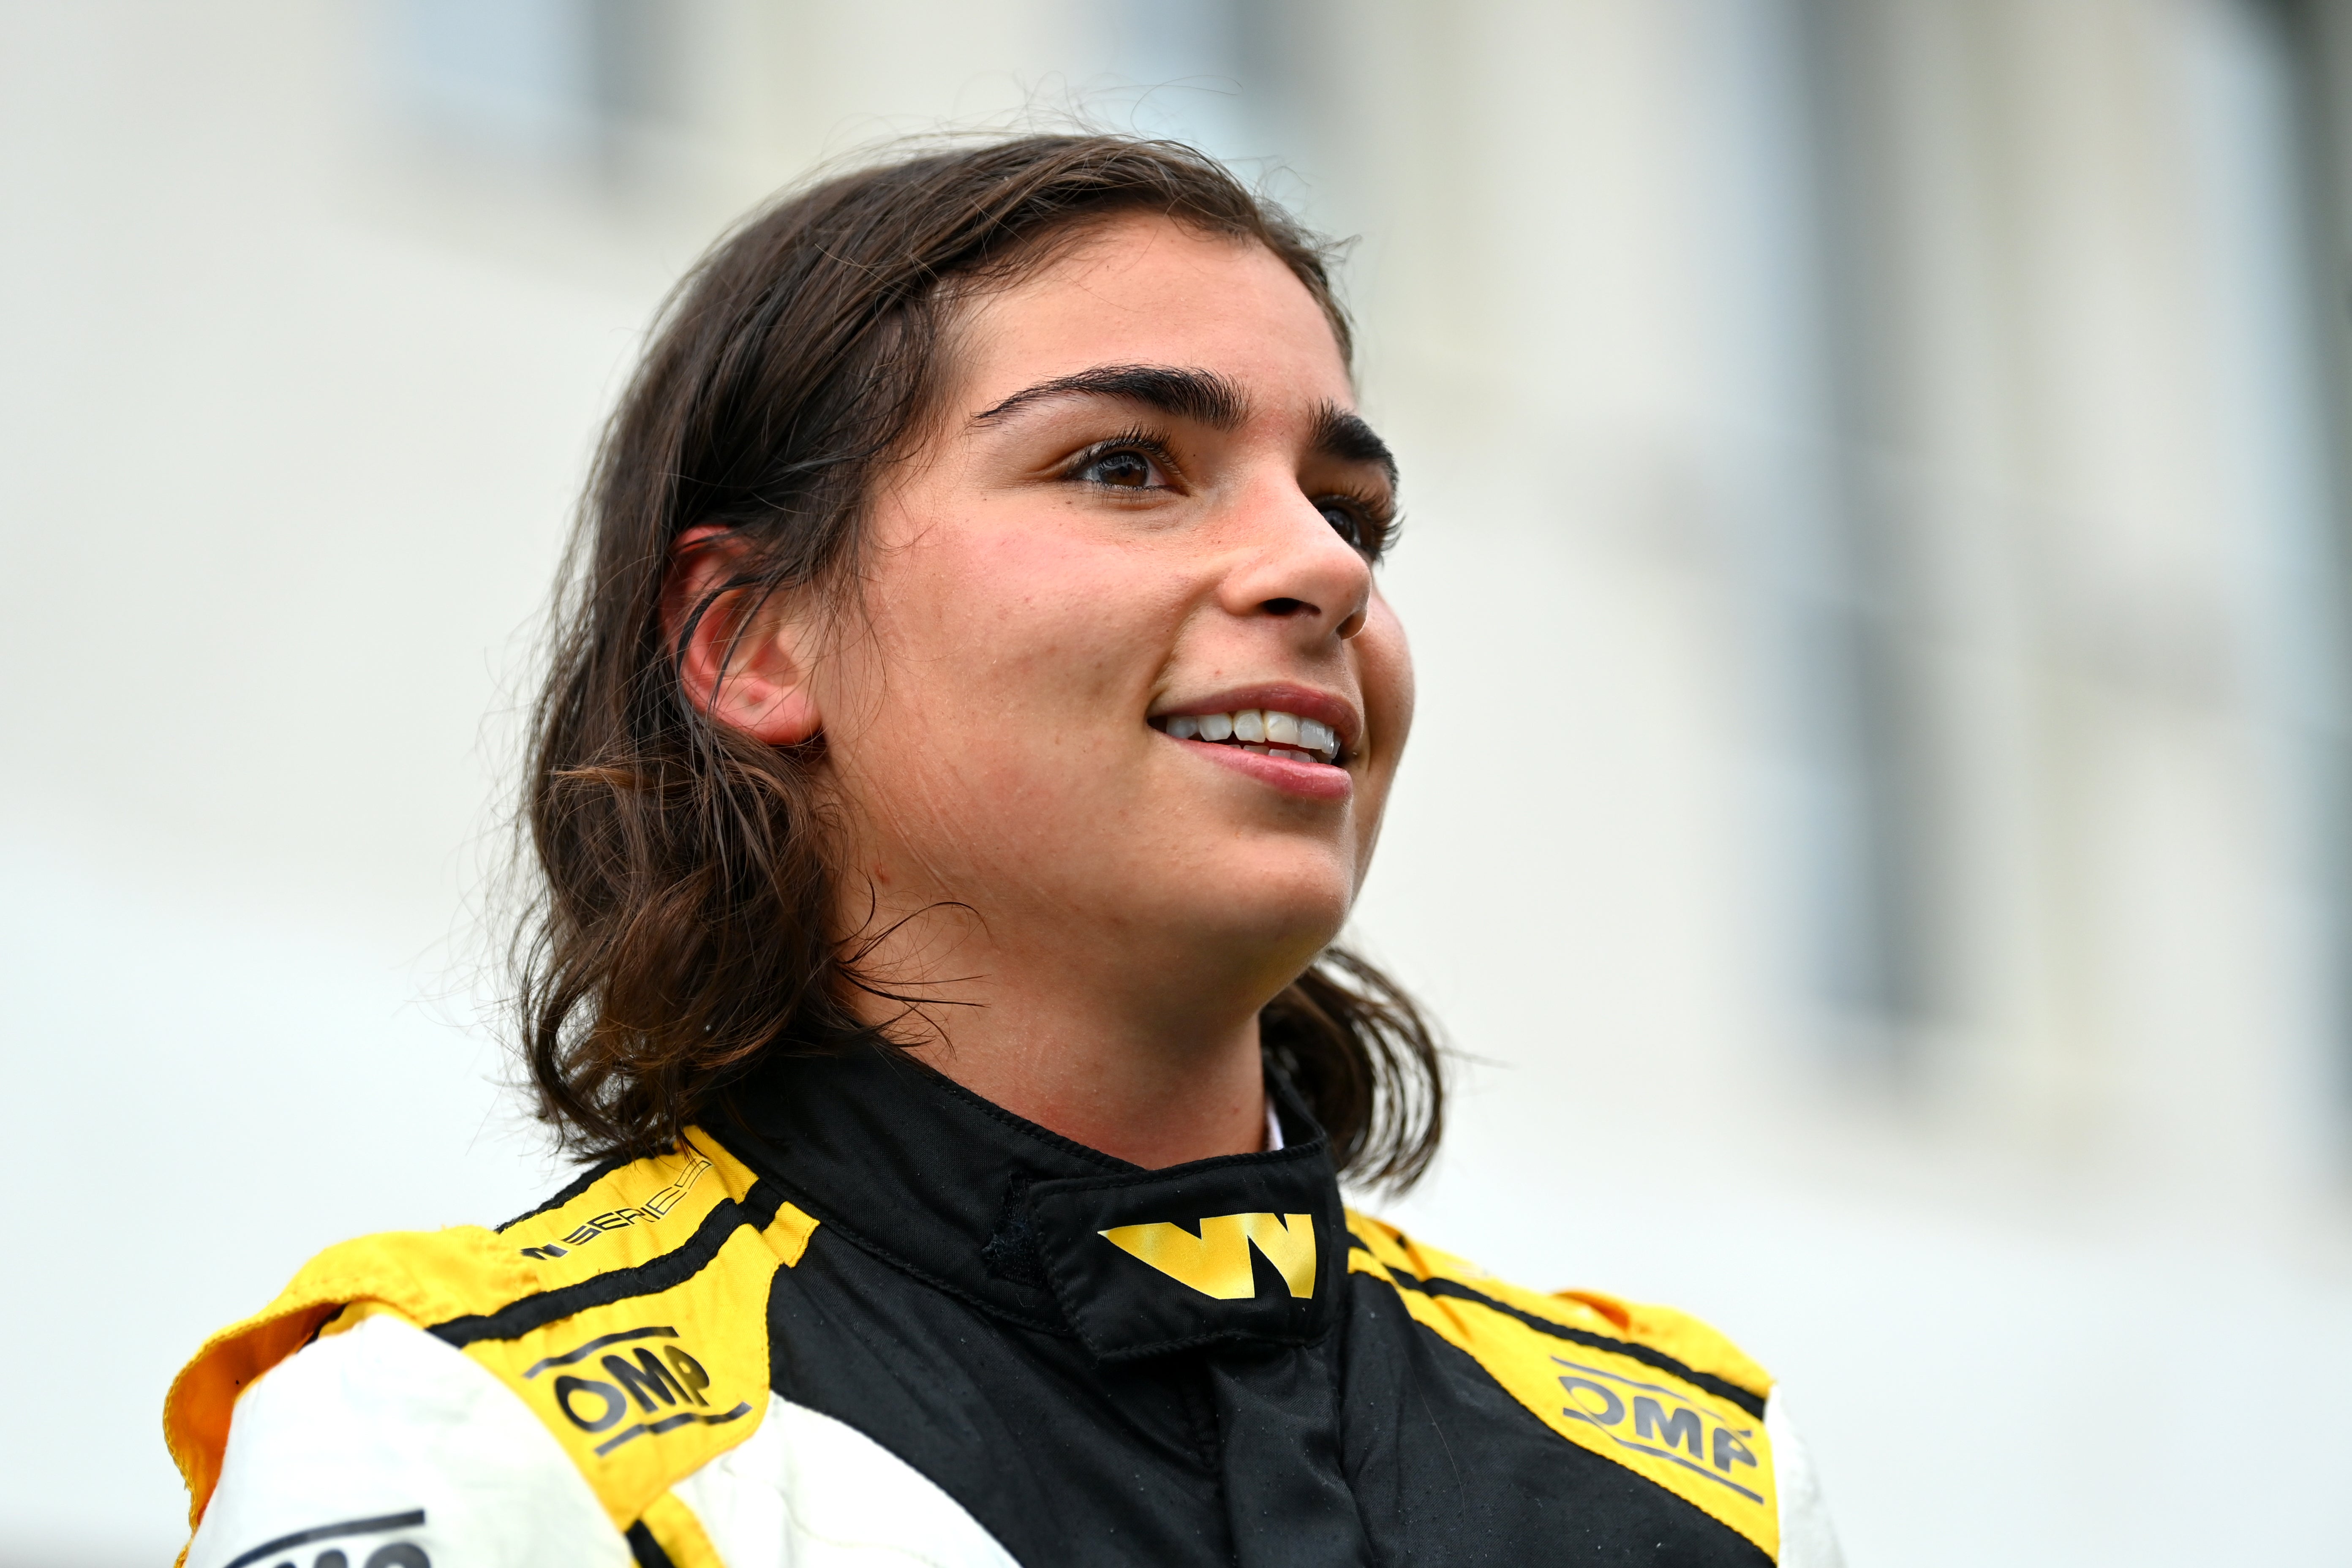 Jamie Chadwick is a three-time W Series champion and is currently racing in US-based Indy NXT